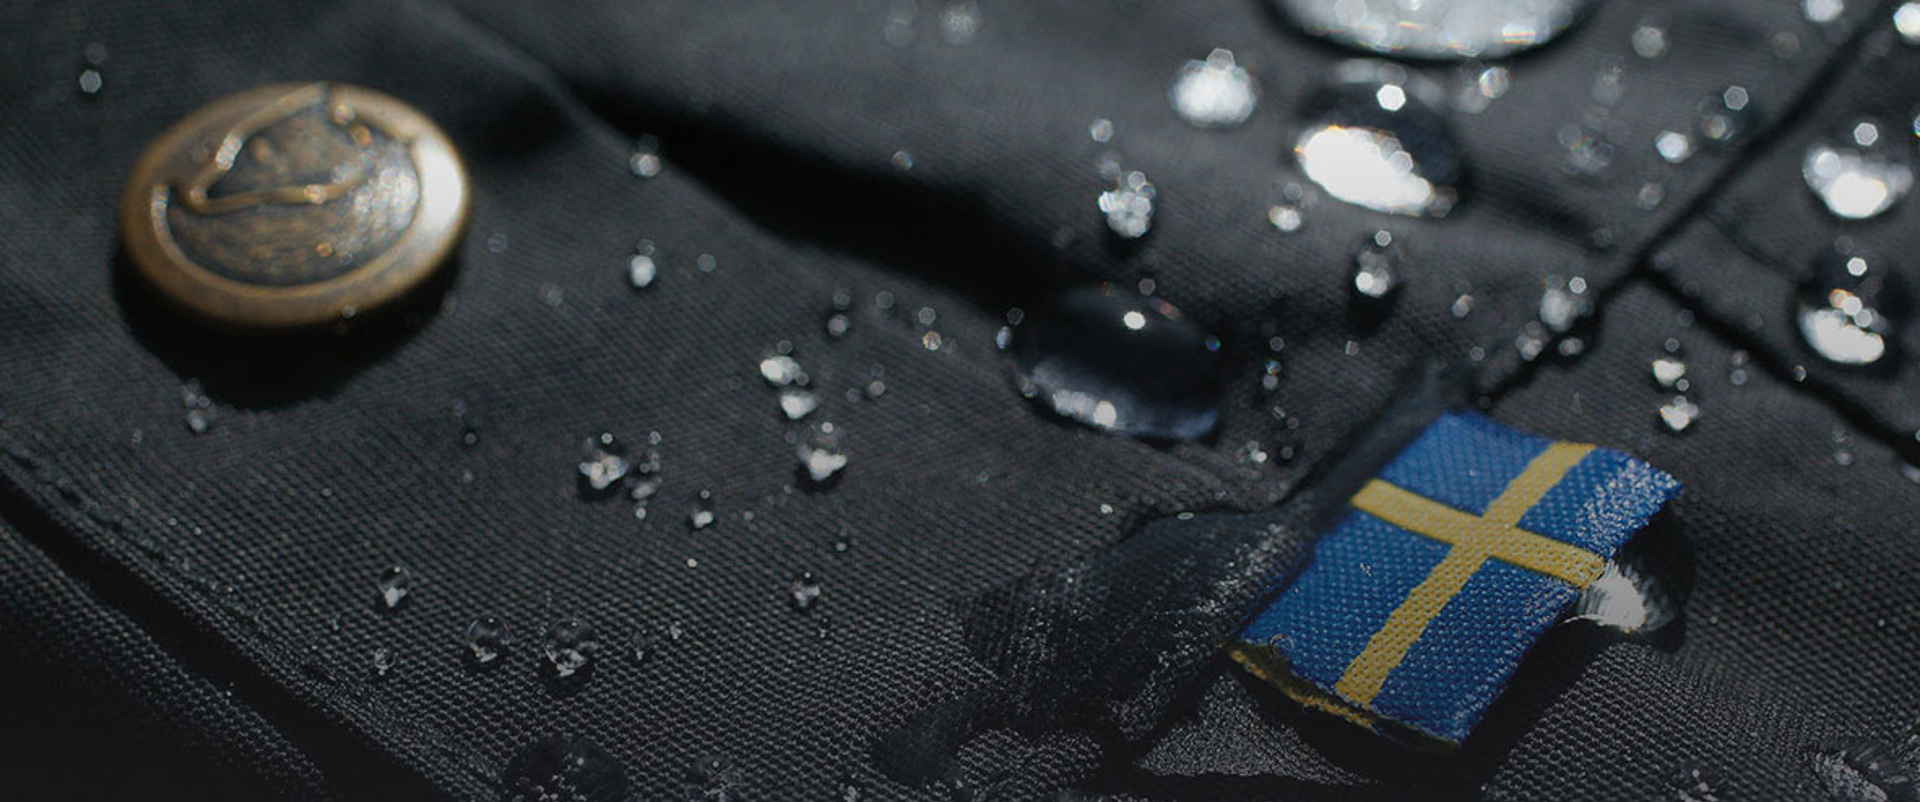 Closeup of G1000 fabric with stitched Swedish flag